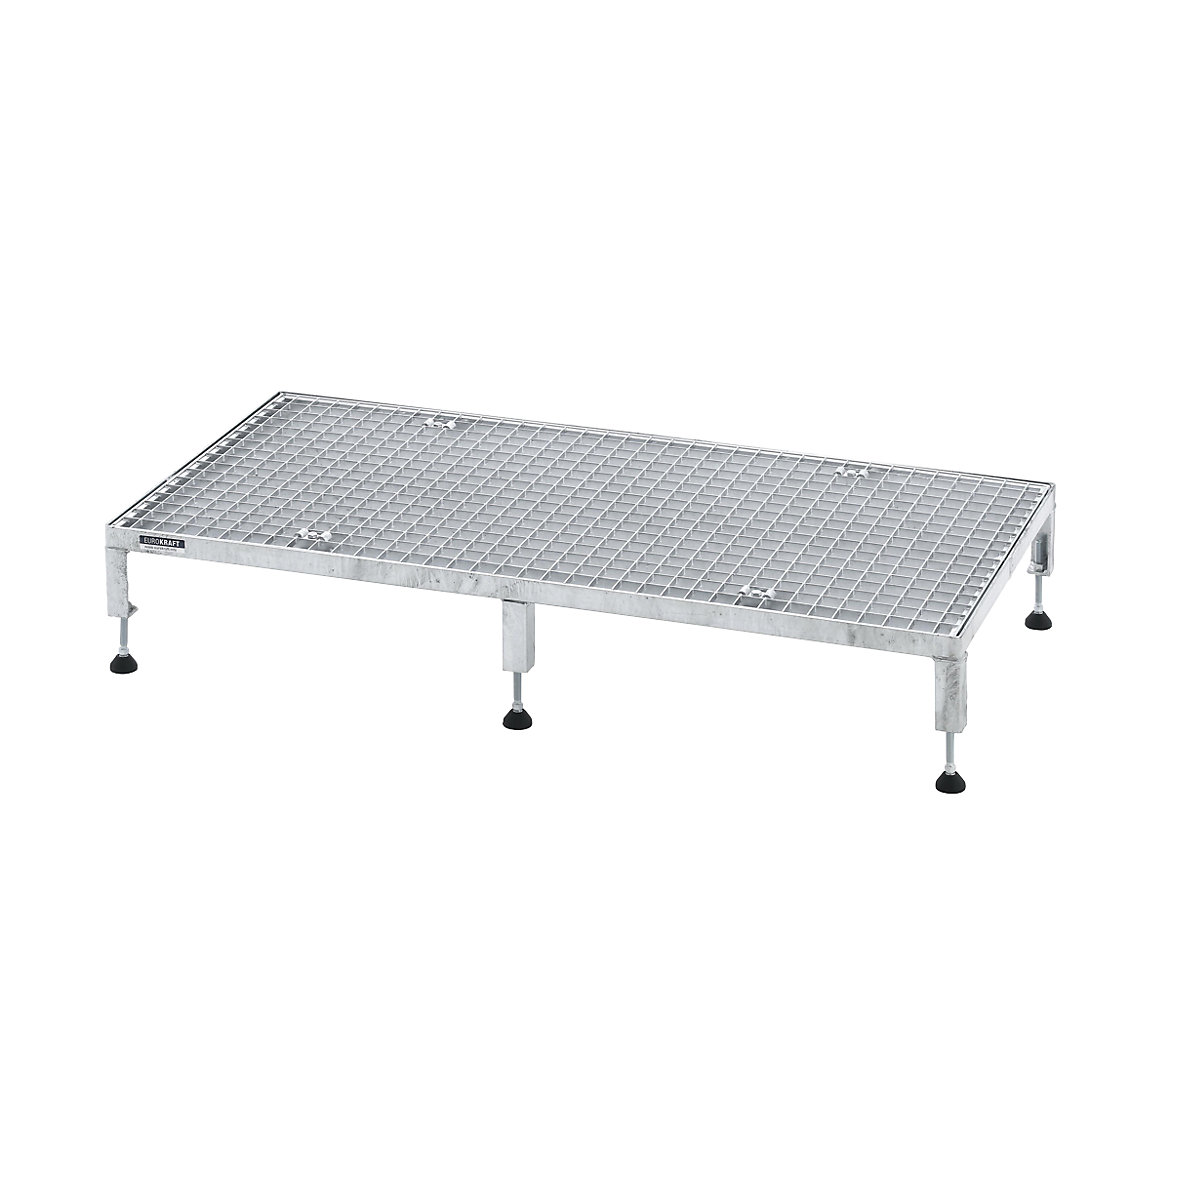 Working platform, height adjustable from 165 – 230 mm – eurokraft pro, with mesh plate, platform LxW 1210 x 610 mm, hot dip galvanised-8